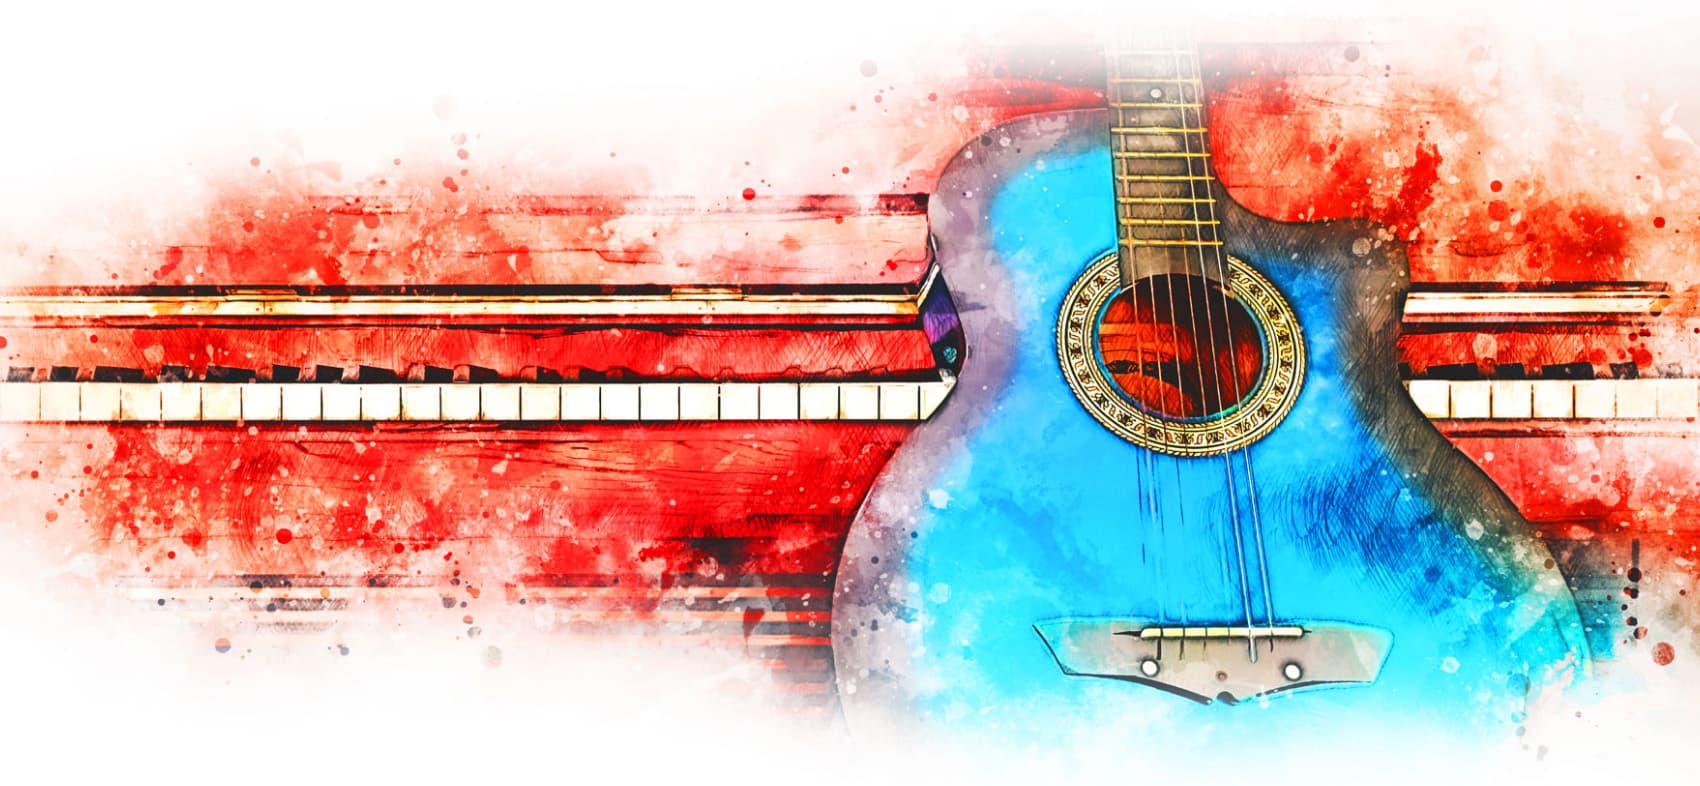 A watercolor painting of a guitar and piano